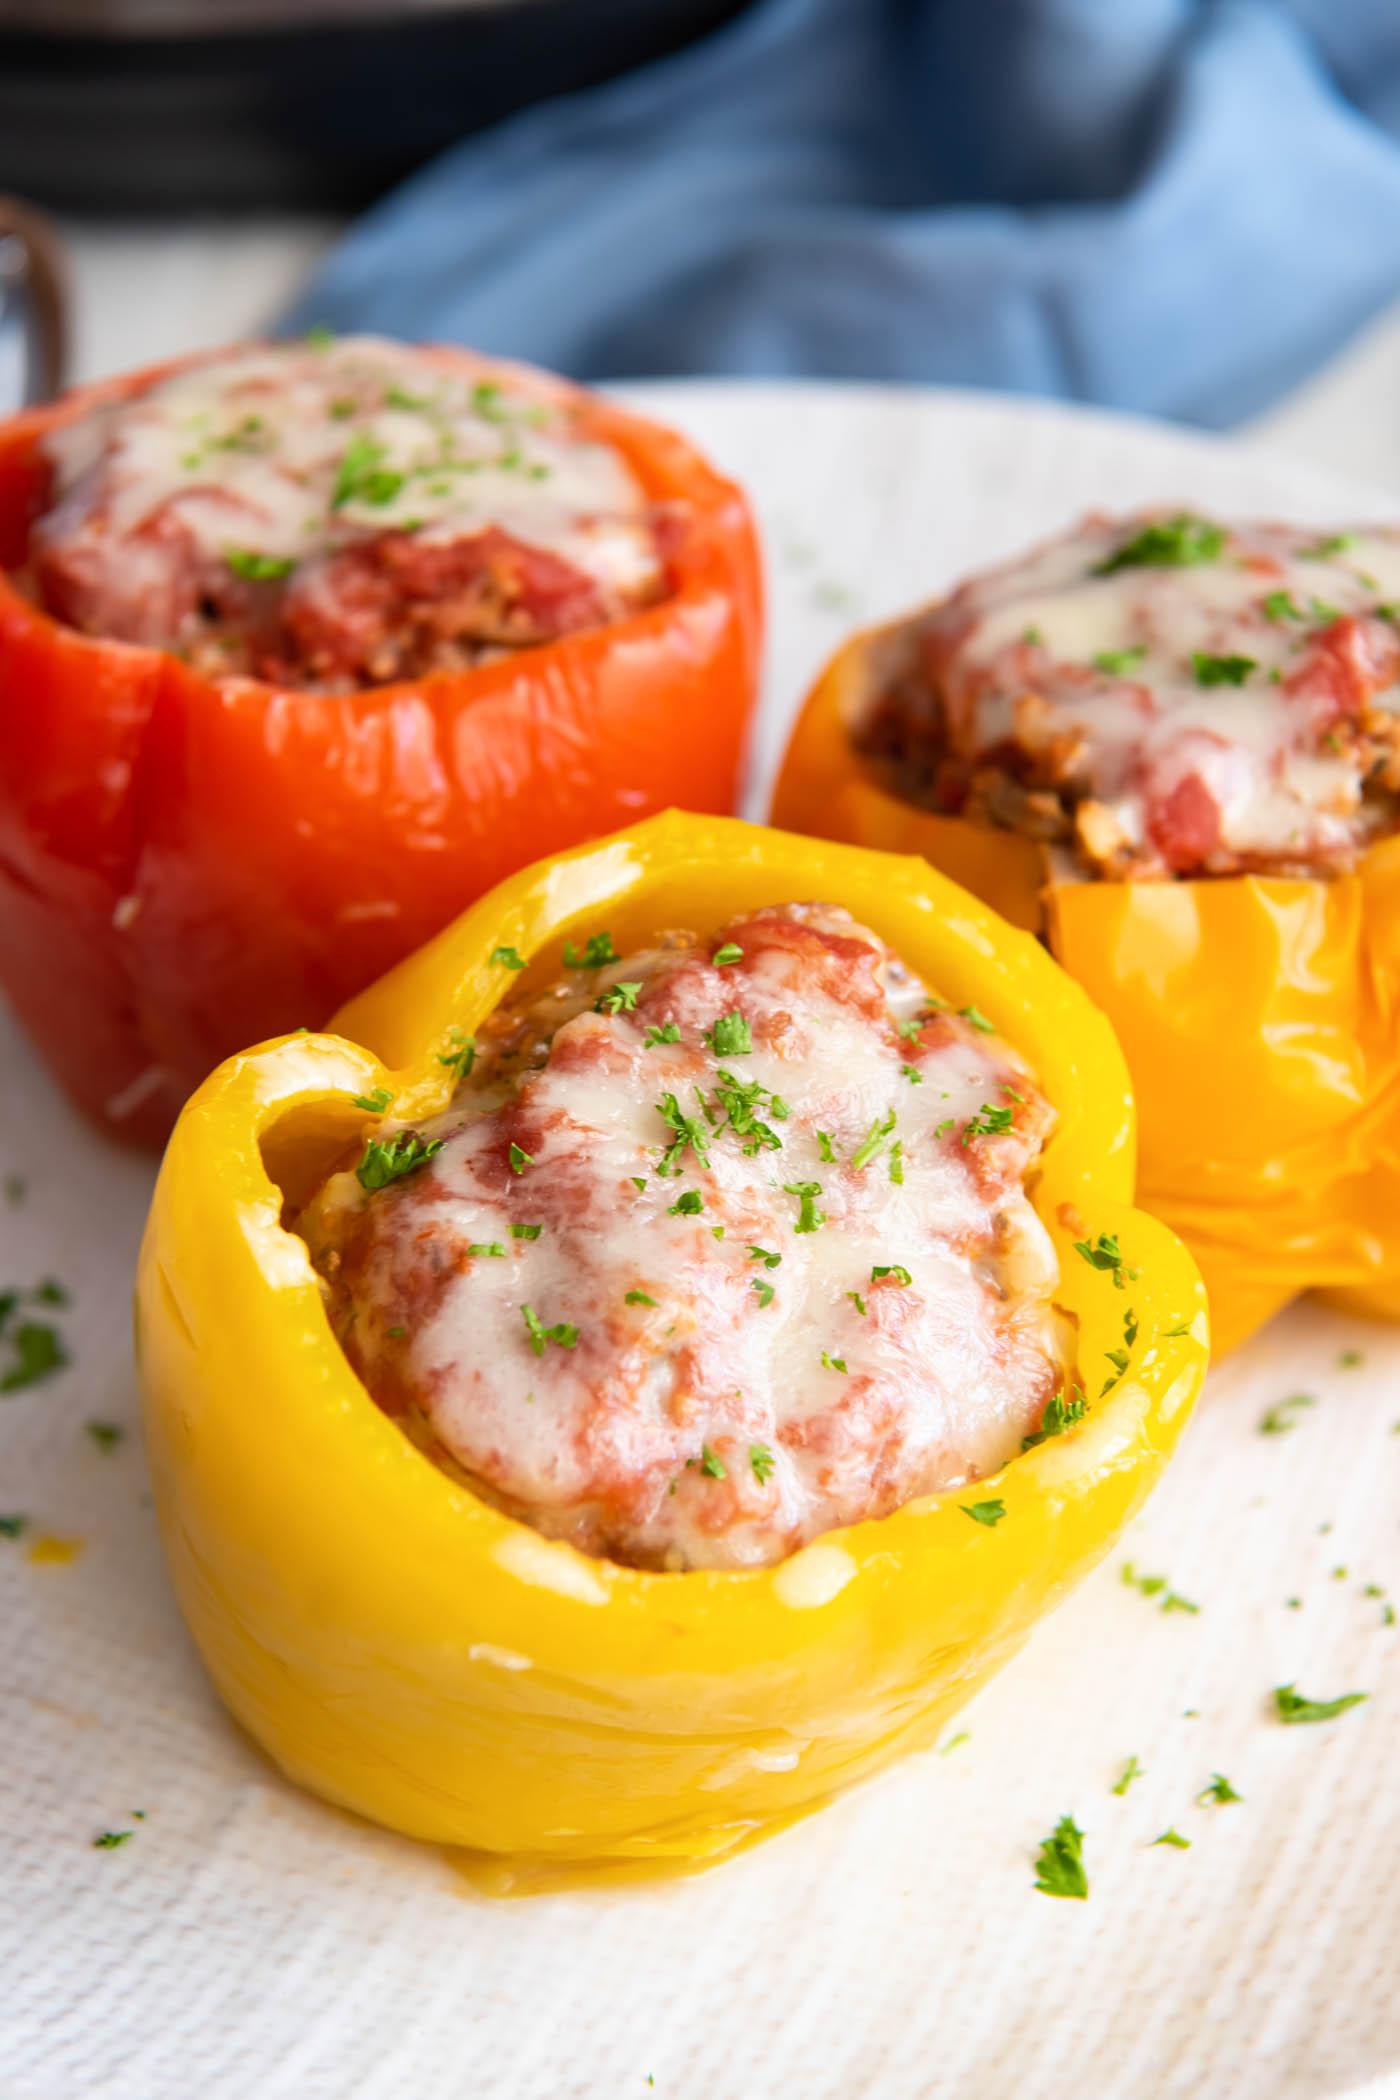 Three stuffed peppers on a plate.